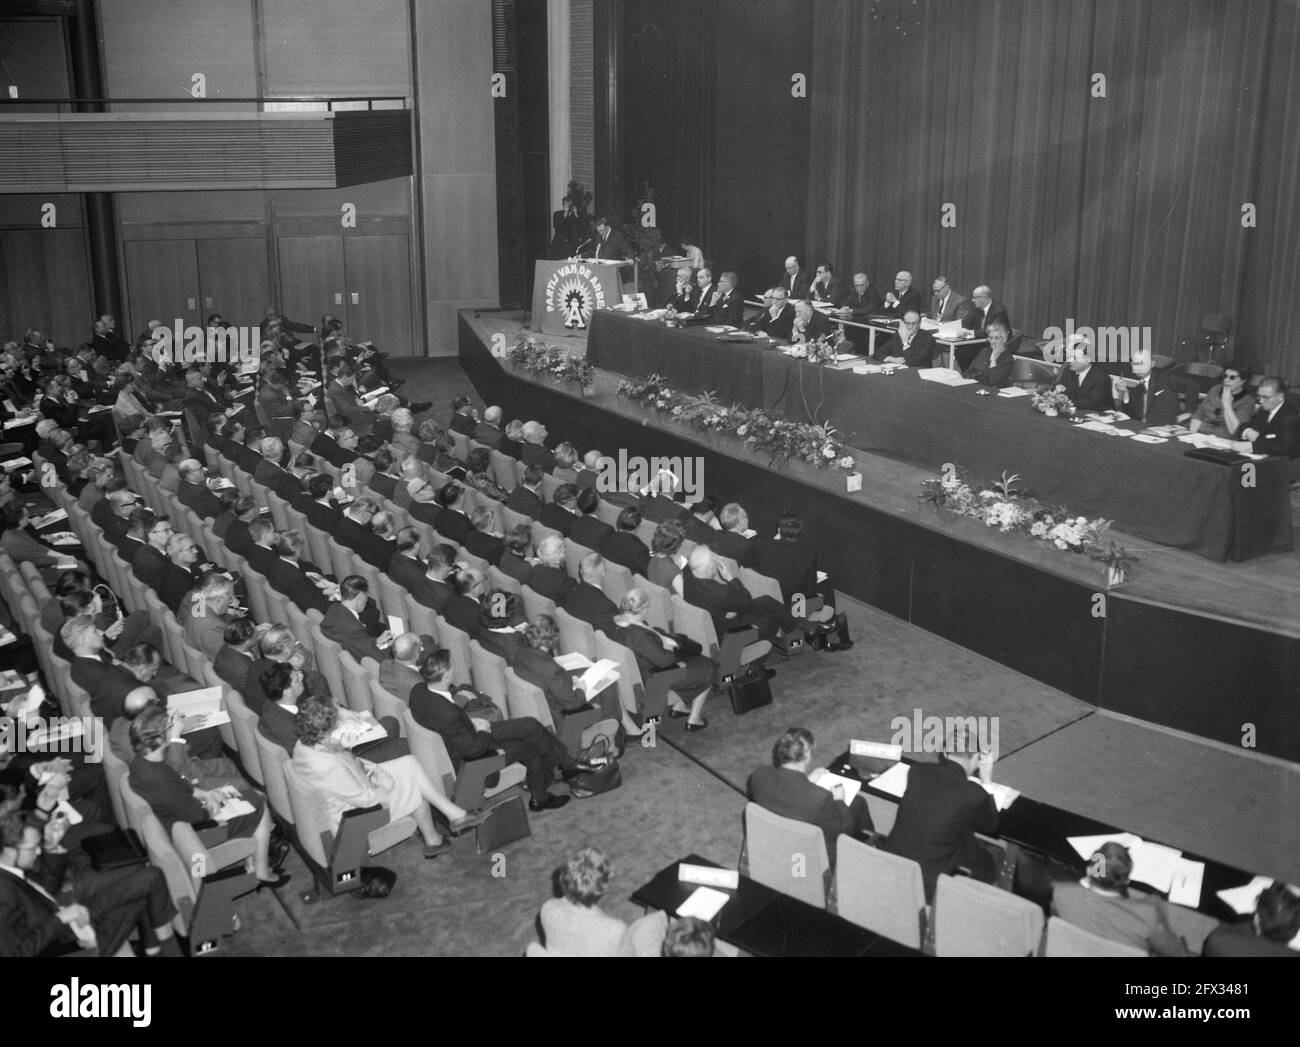 Congress Party of Labour, overview during Mr. J. G. Suurhof's speech, 5 March 1965, congresses, overviews, speeches, The Netherlands, 20th century press agency photo, news to remember, documentary, historic photography 1945-1990, visual stories, human history of the Twentieth Century, capturing moments in time Stock Photo